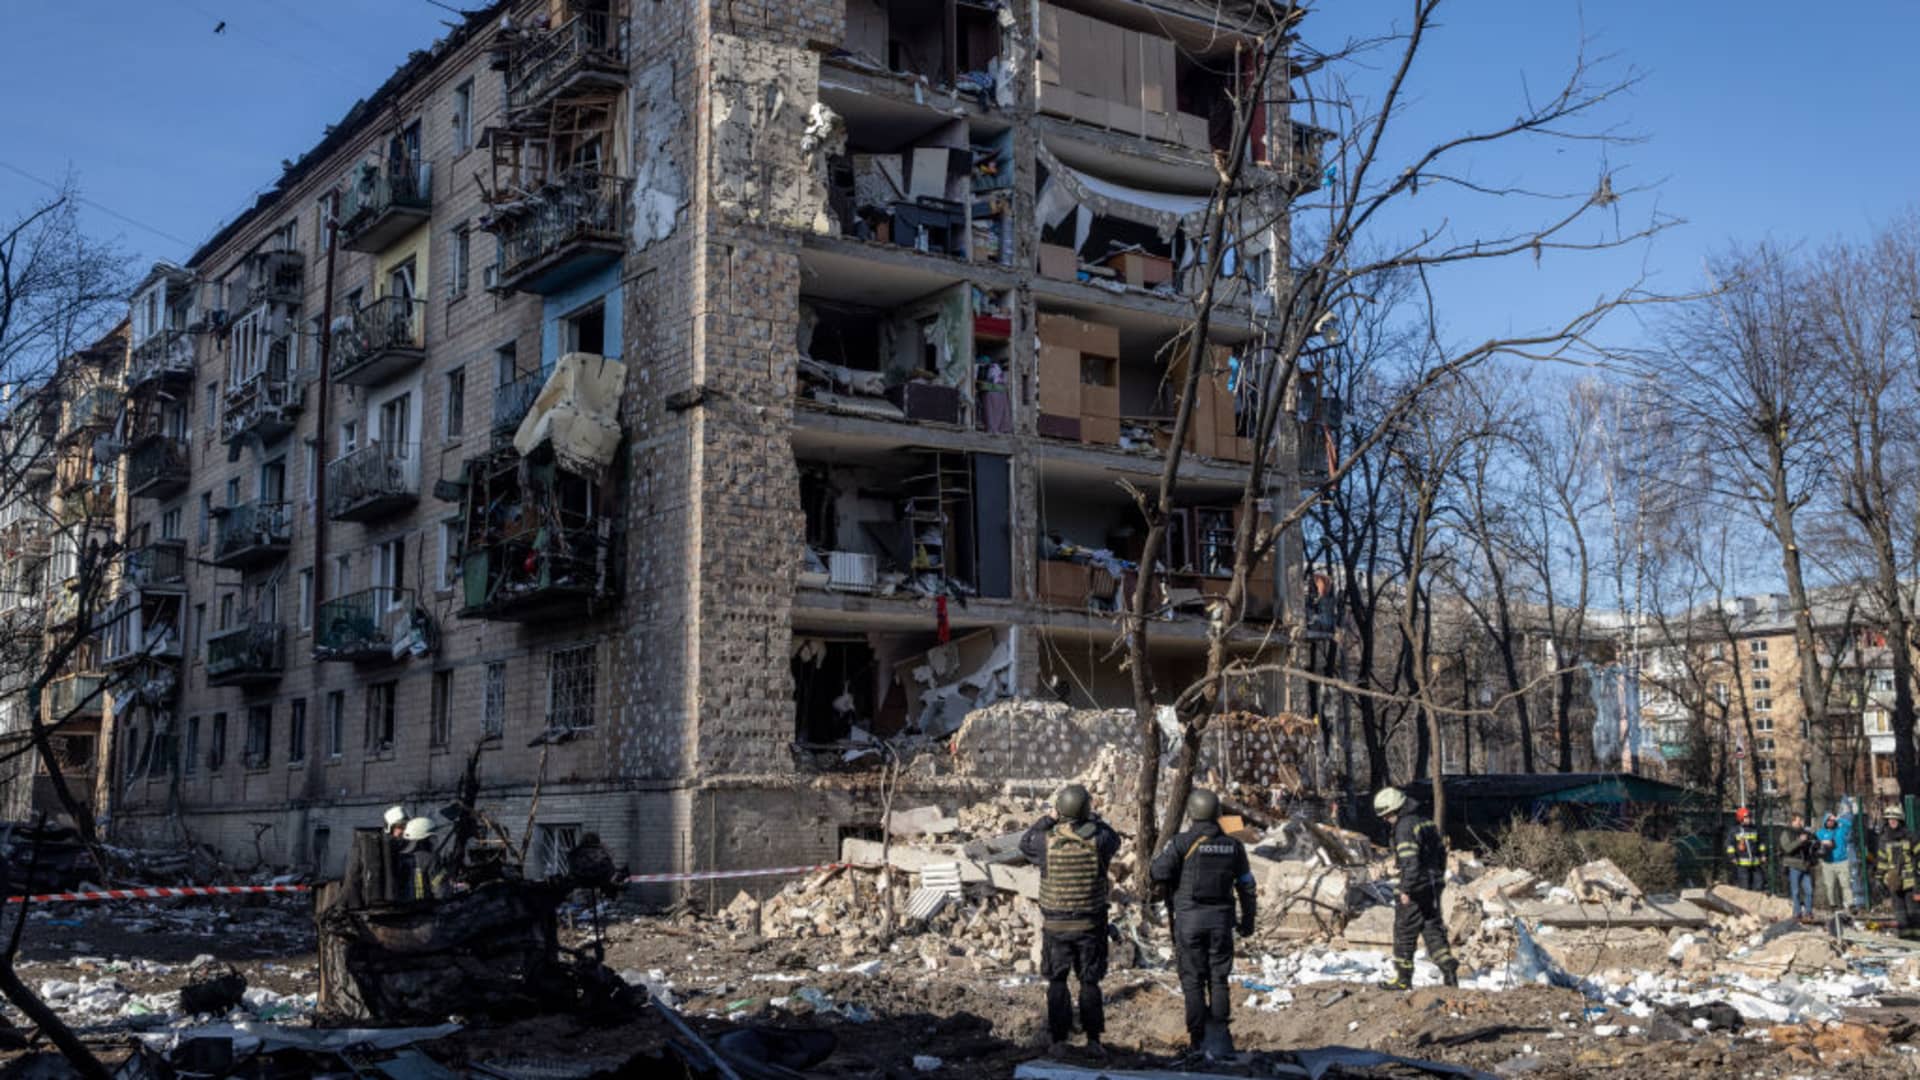 Police and military personnel stand in front of a residential apartment complex that was heavily damaged by a Russian attack on March 18, 2022 in Kyiv, Ukraine.